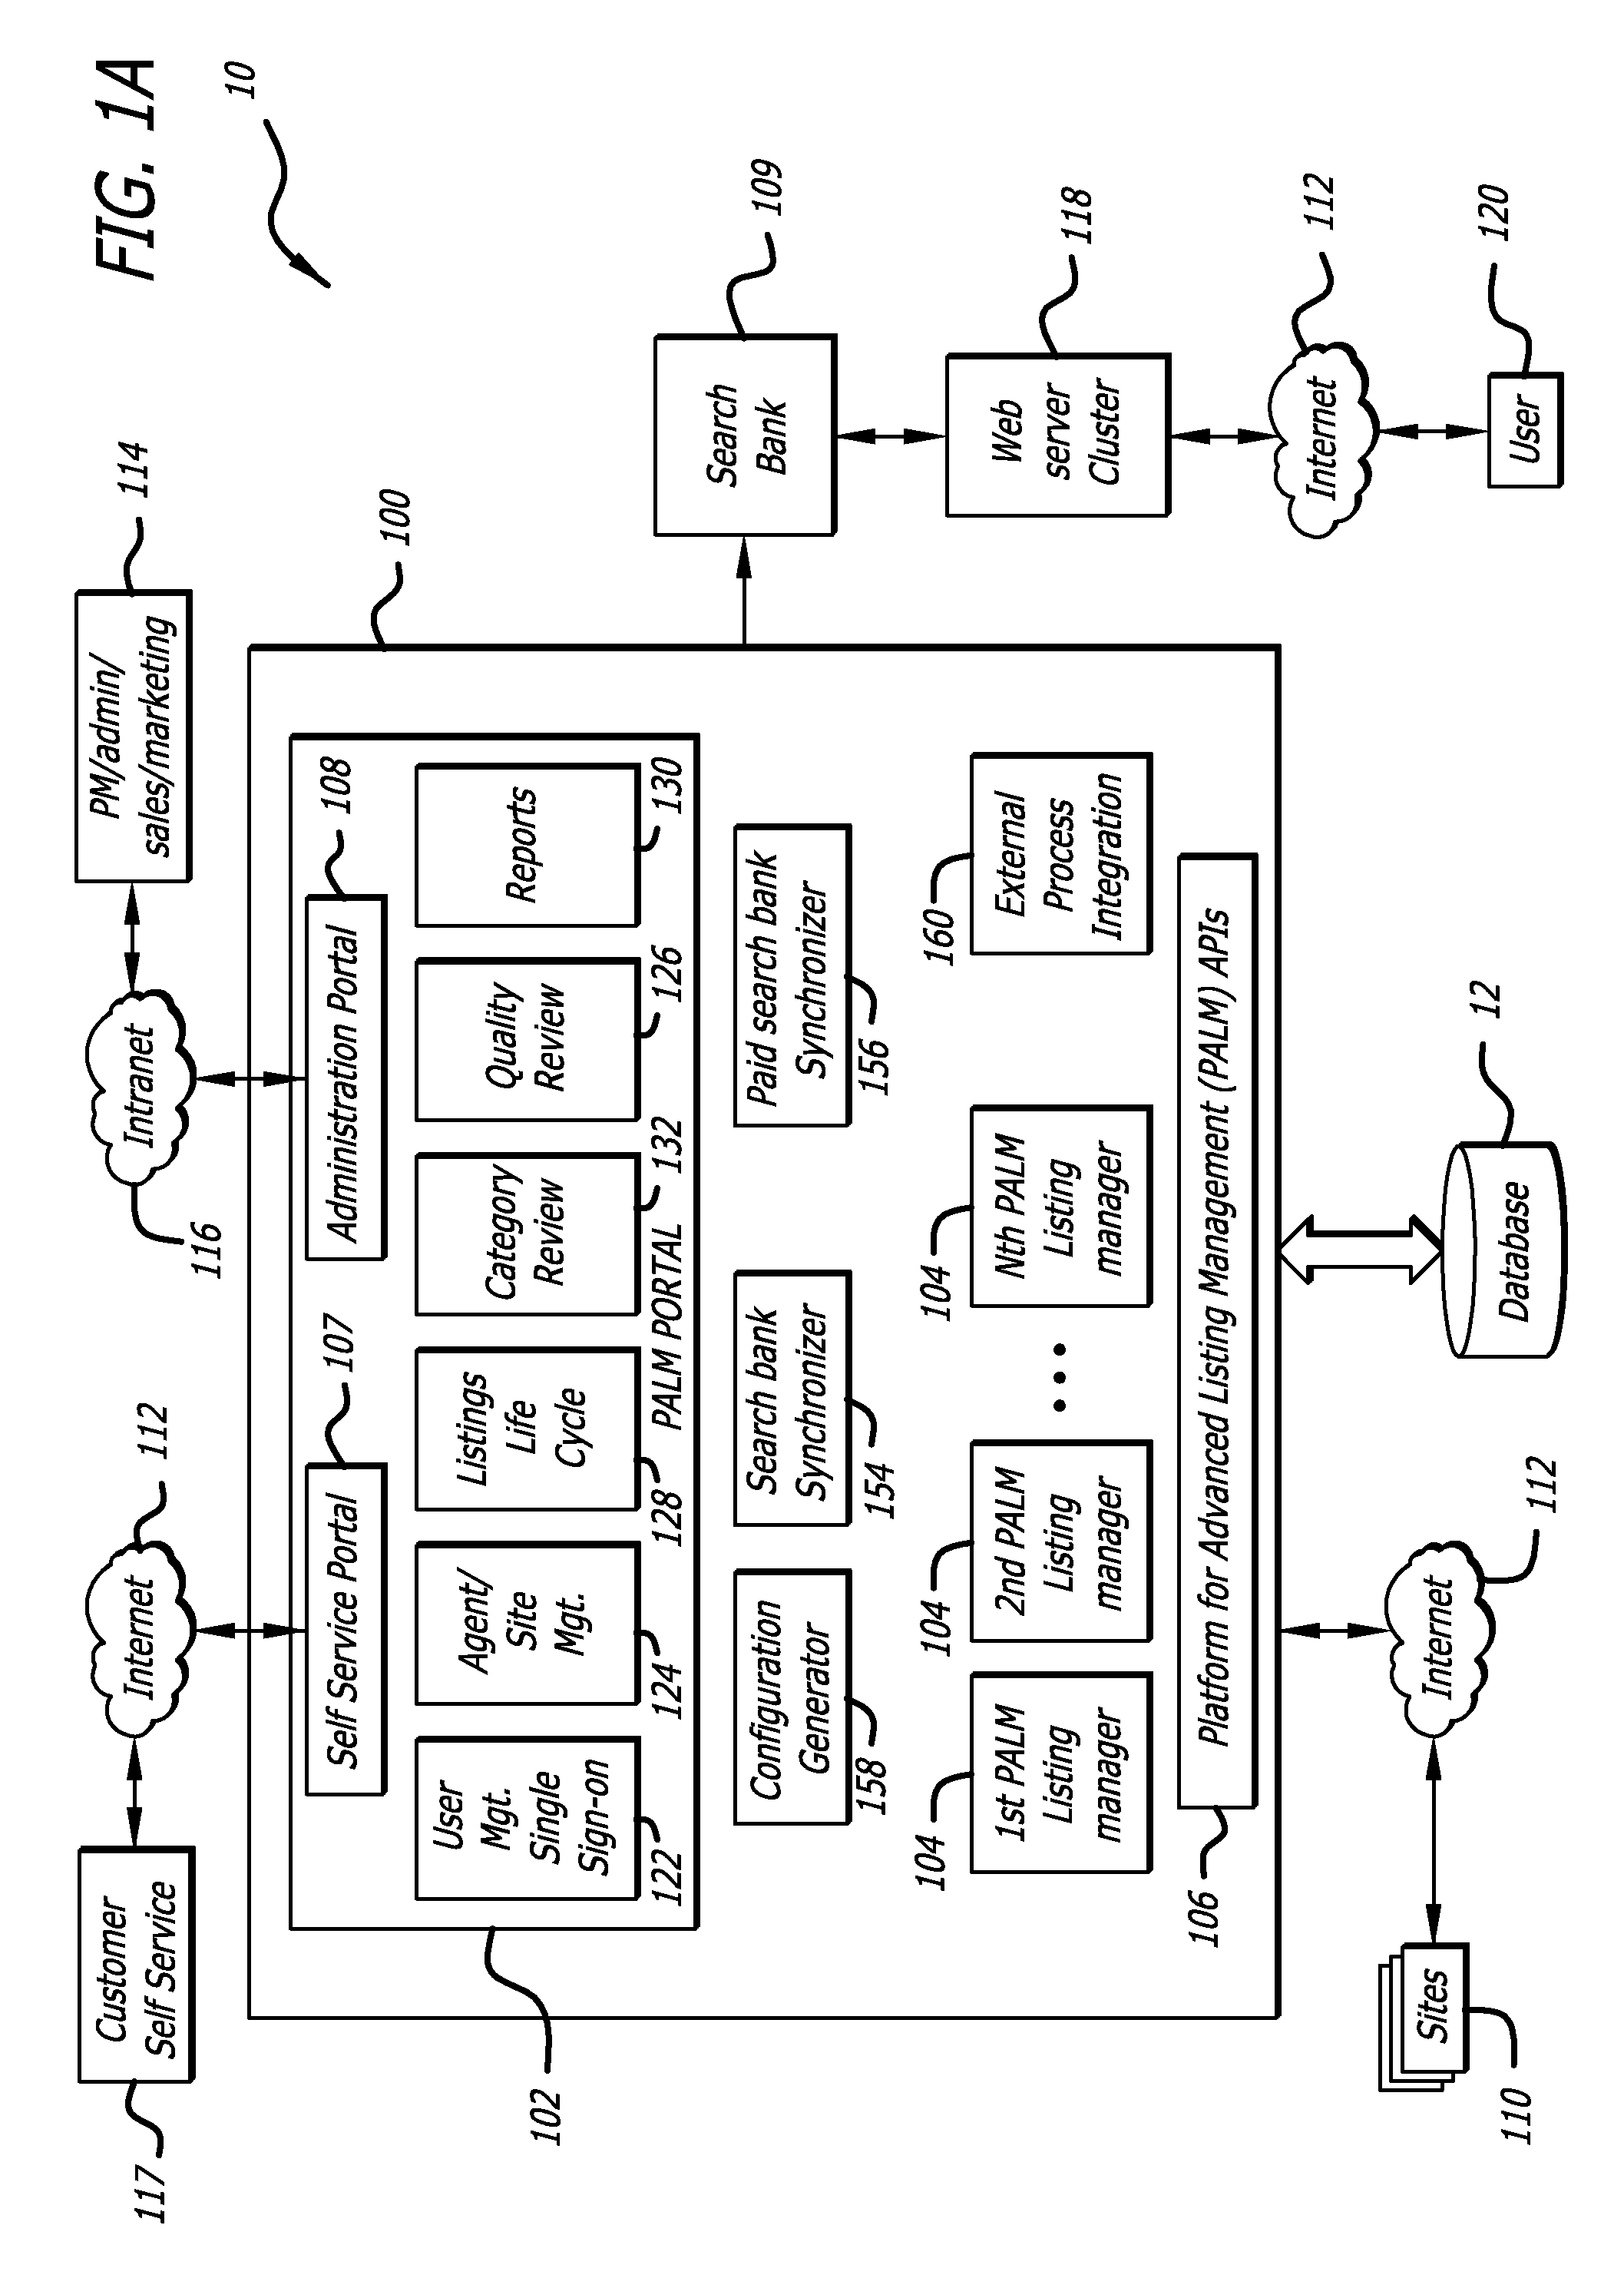 System and method for managing listings